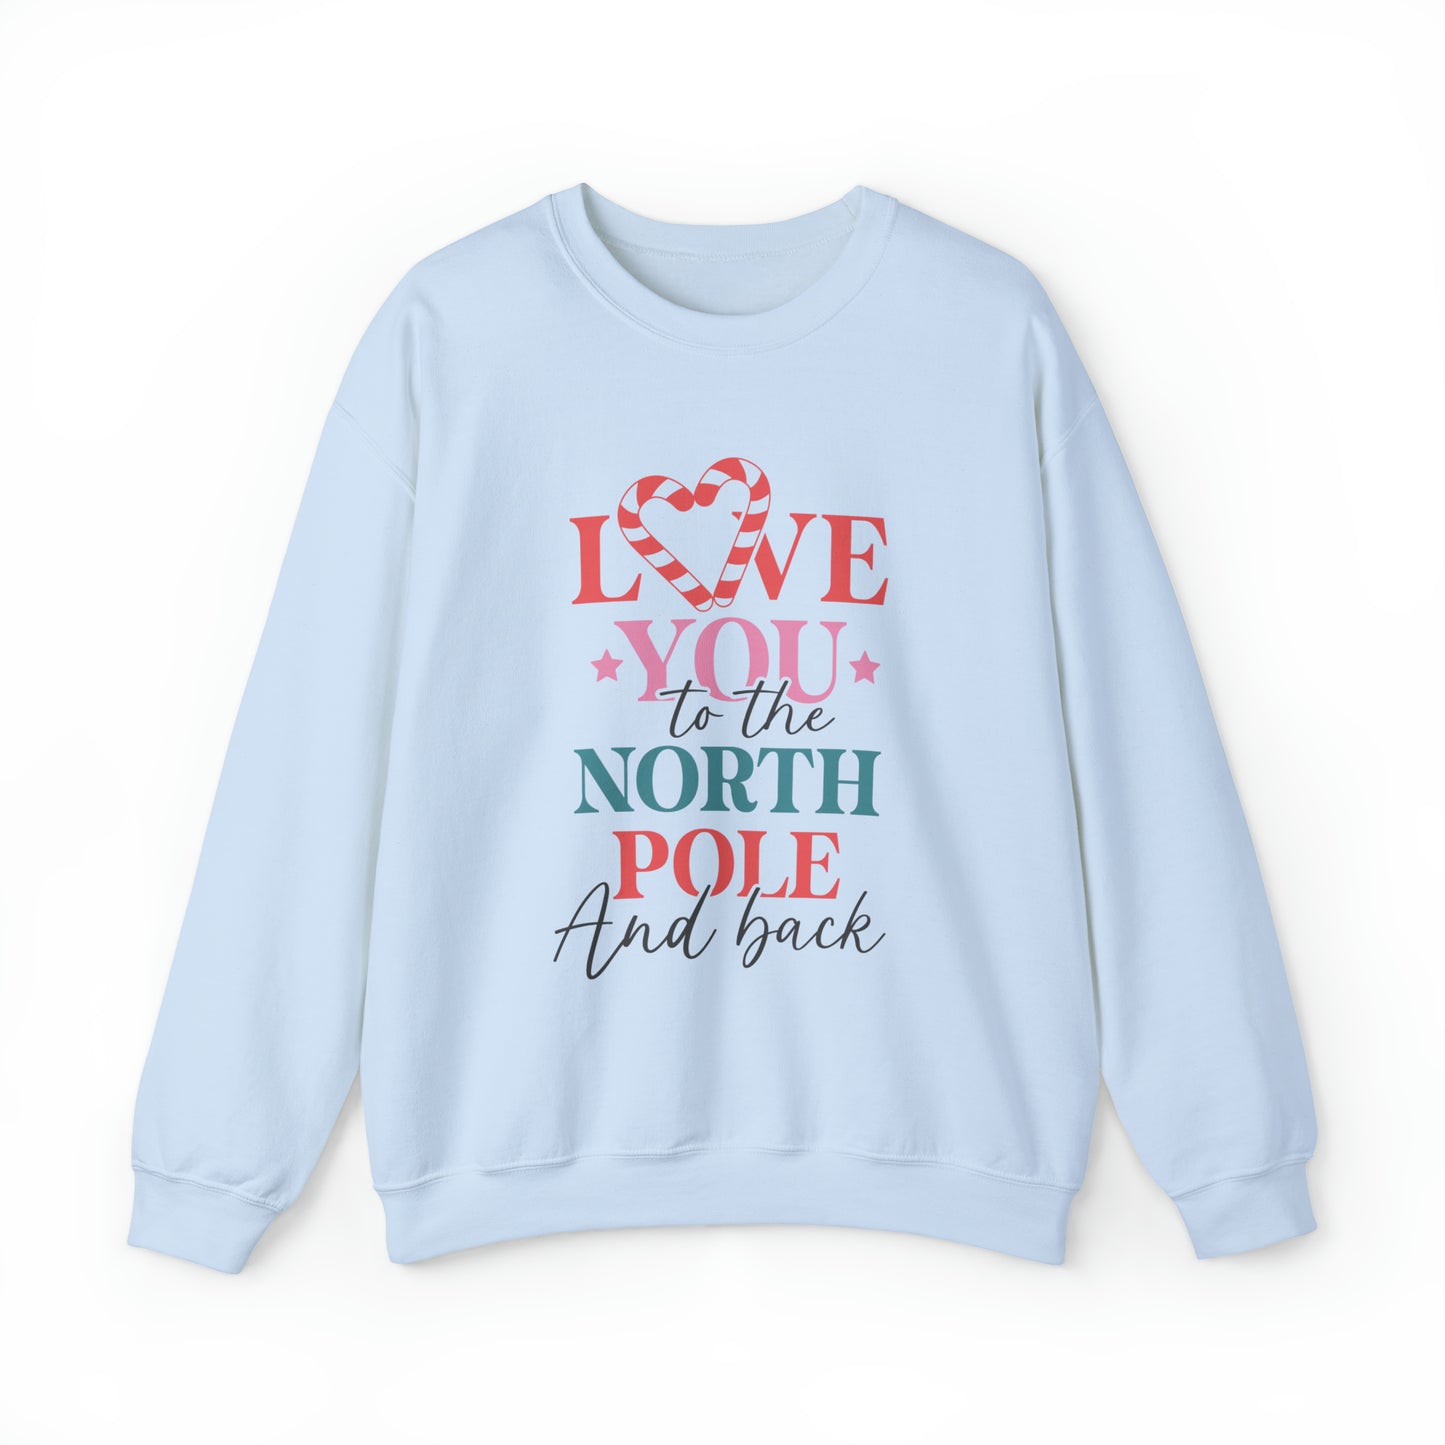 Love you to the north pole and back Women's Christmas Sweatshirt